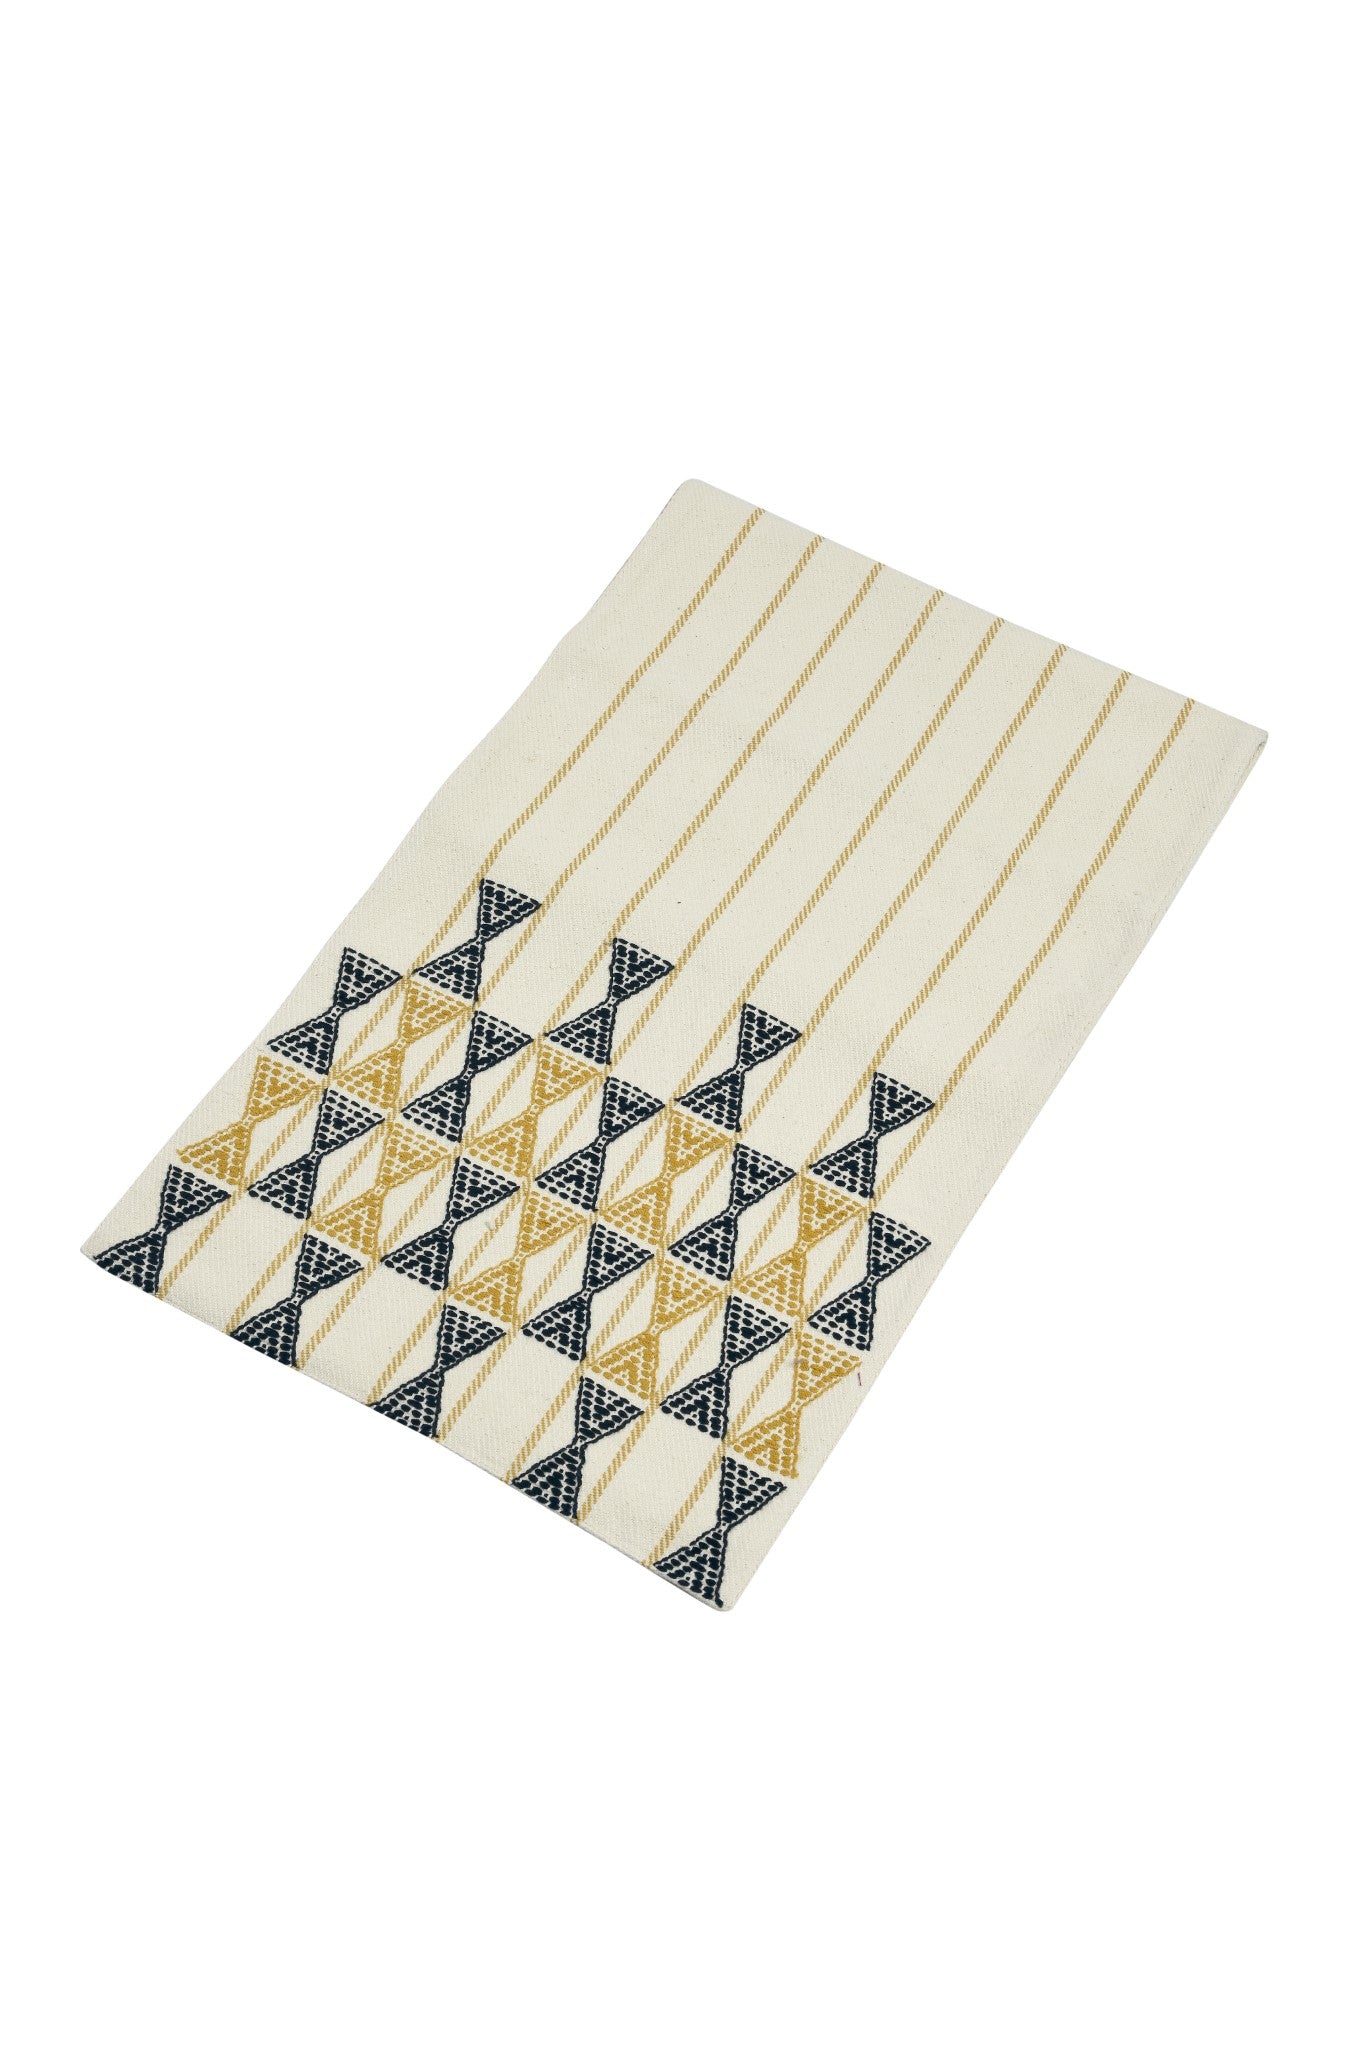 Extra weft table mat in neutral, mustard and navy